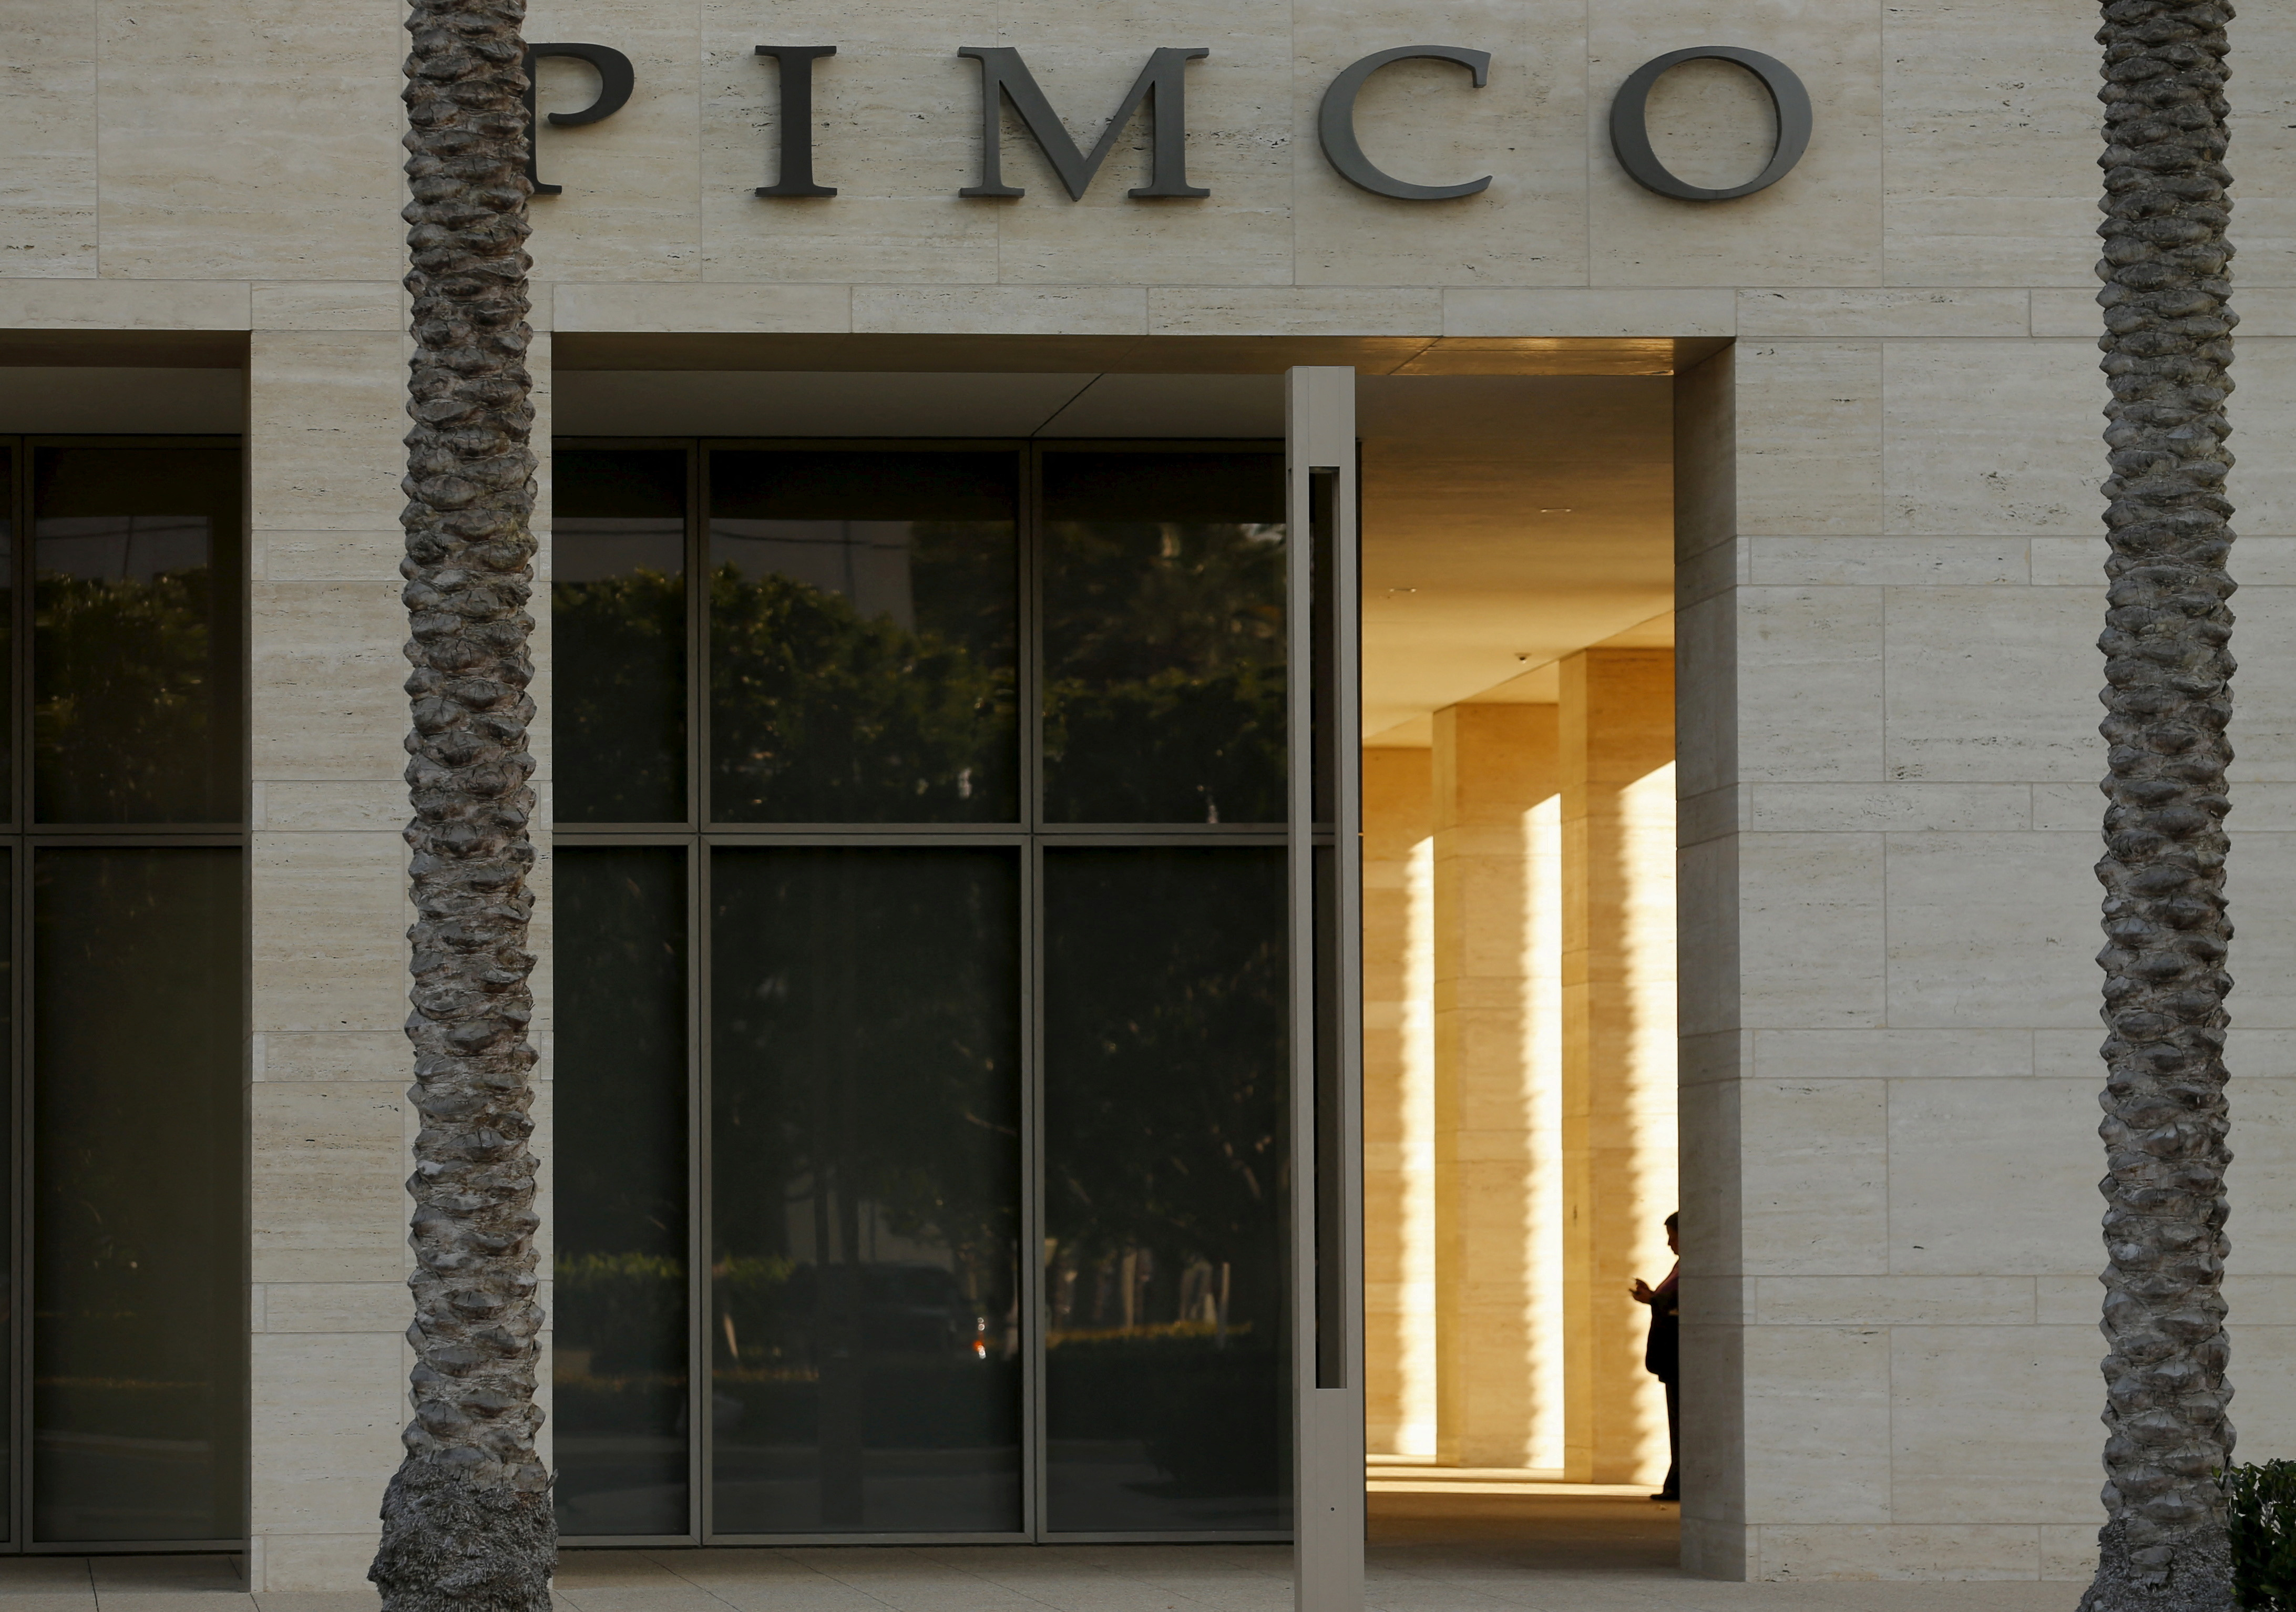 The offices of PIMCO are shown in Newport Beach